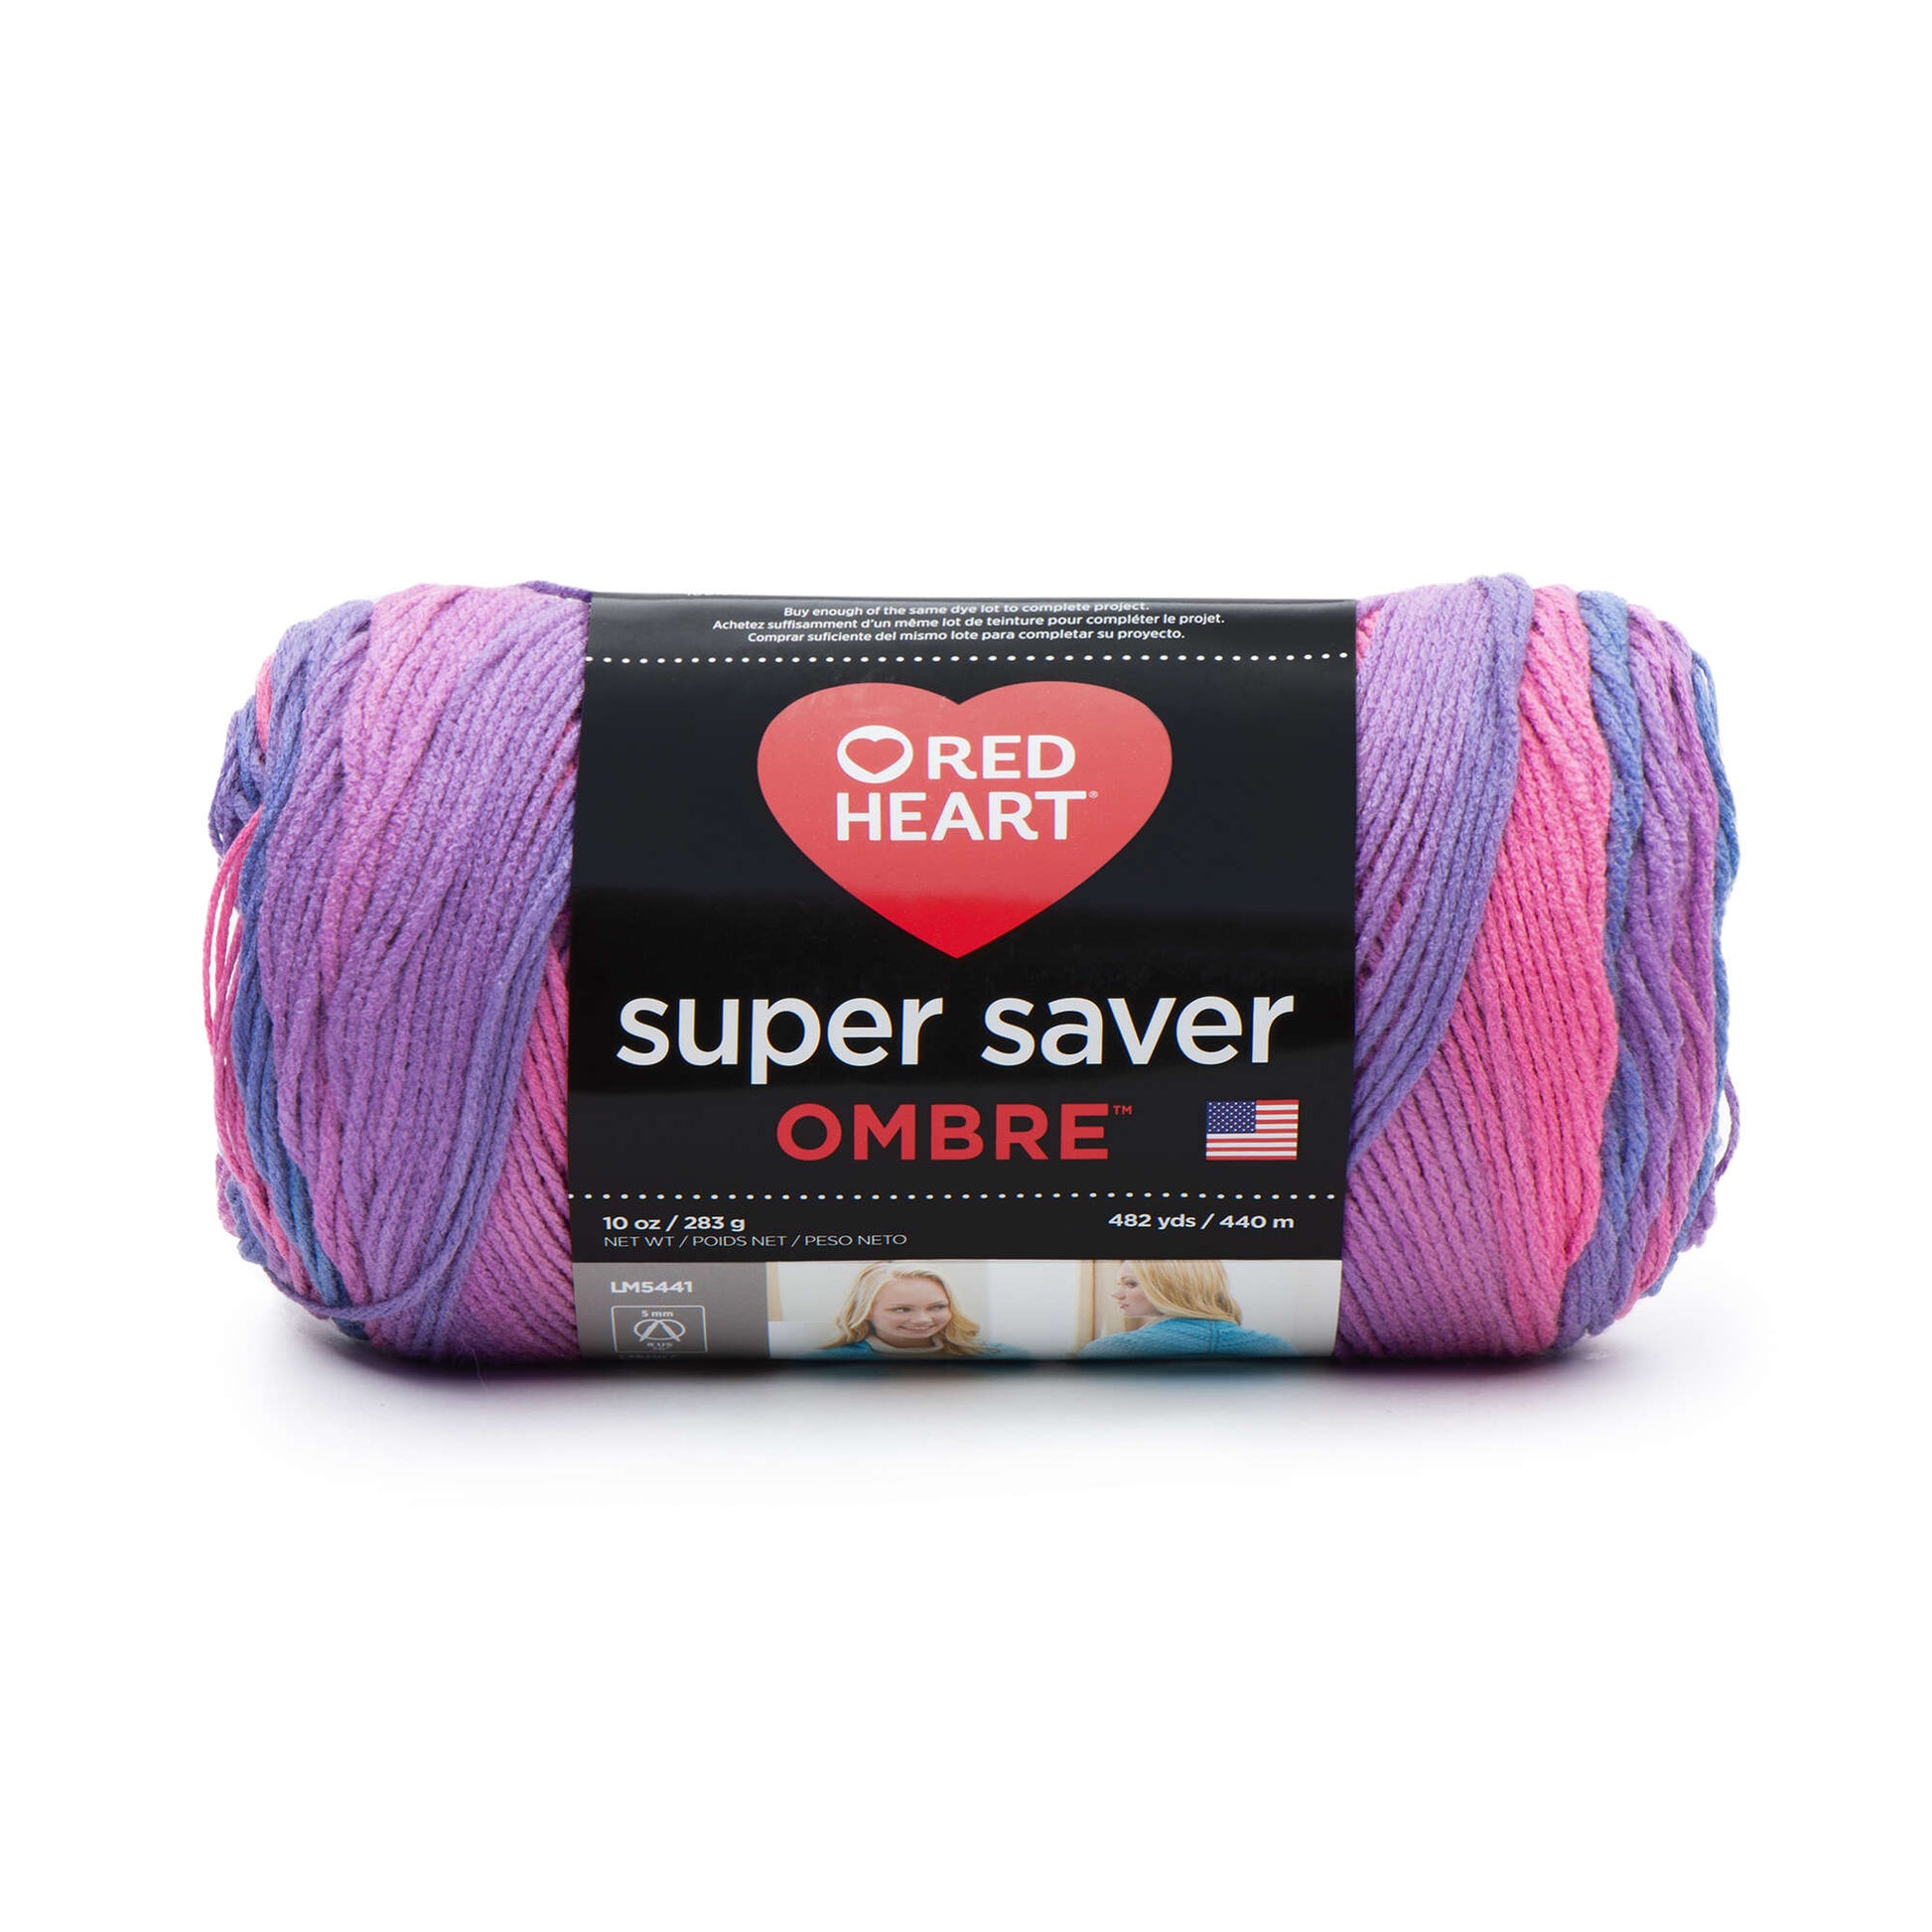 Red Heart Super Saver Ombre Yarn Sweet Treat